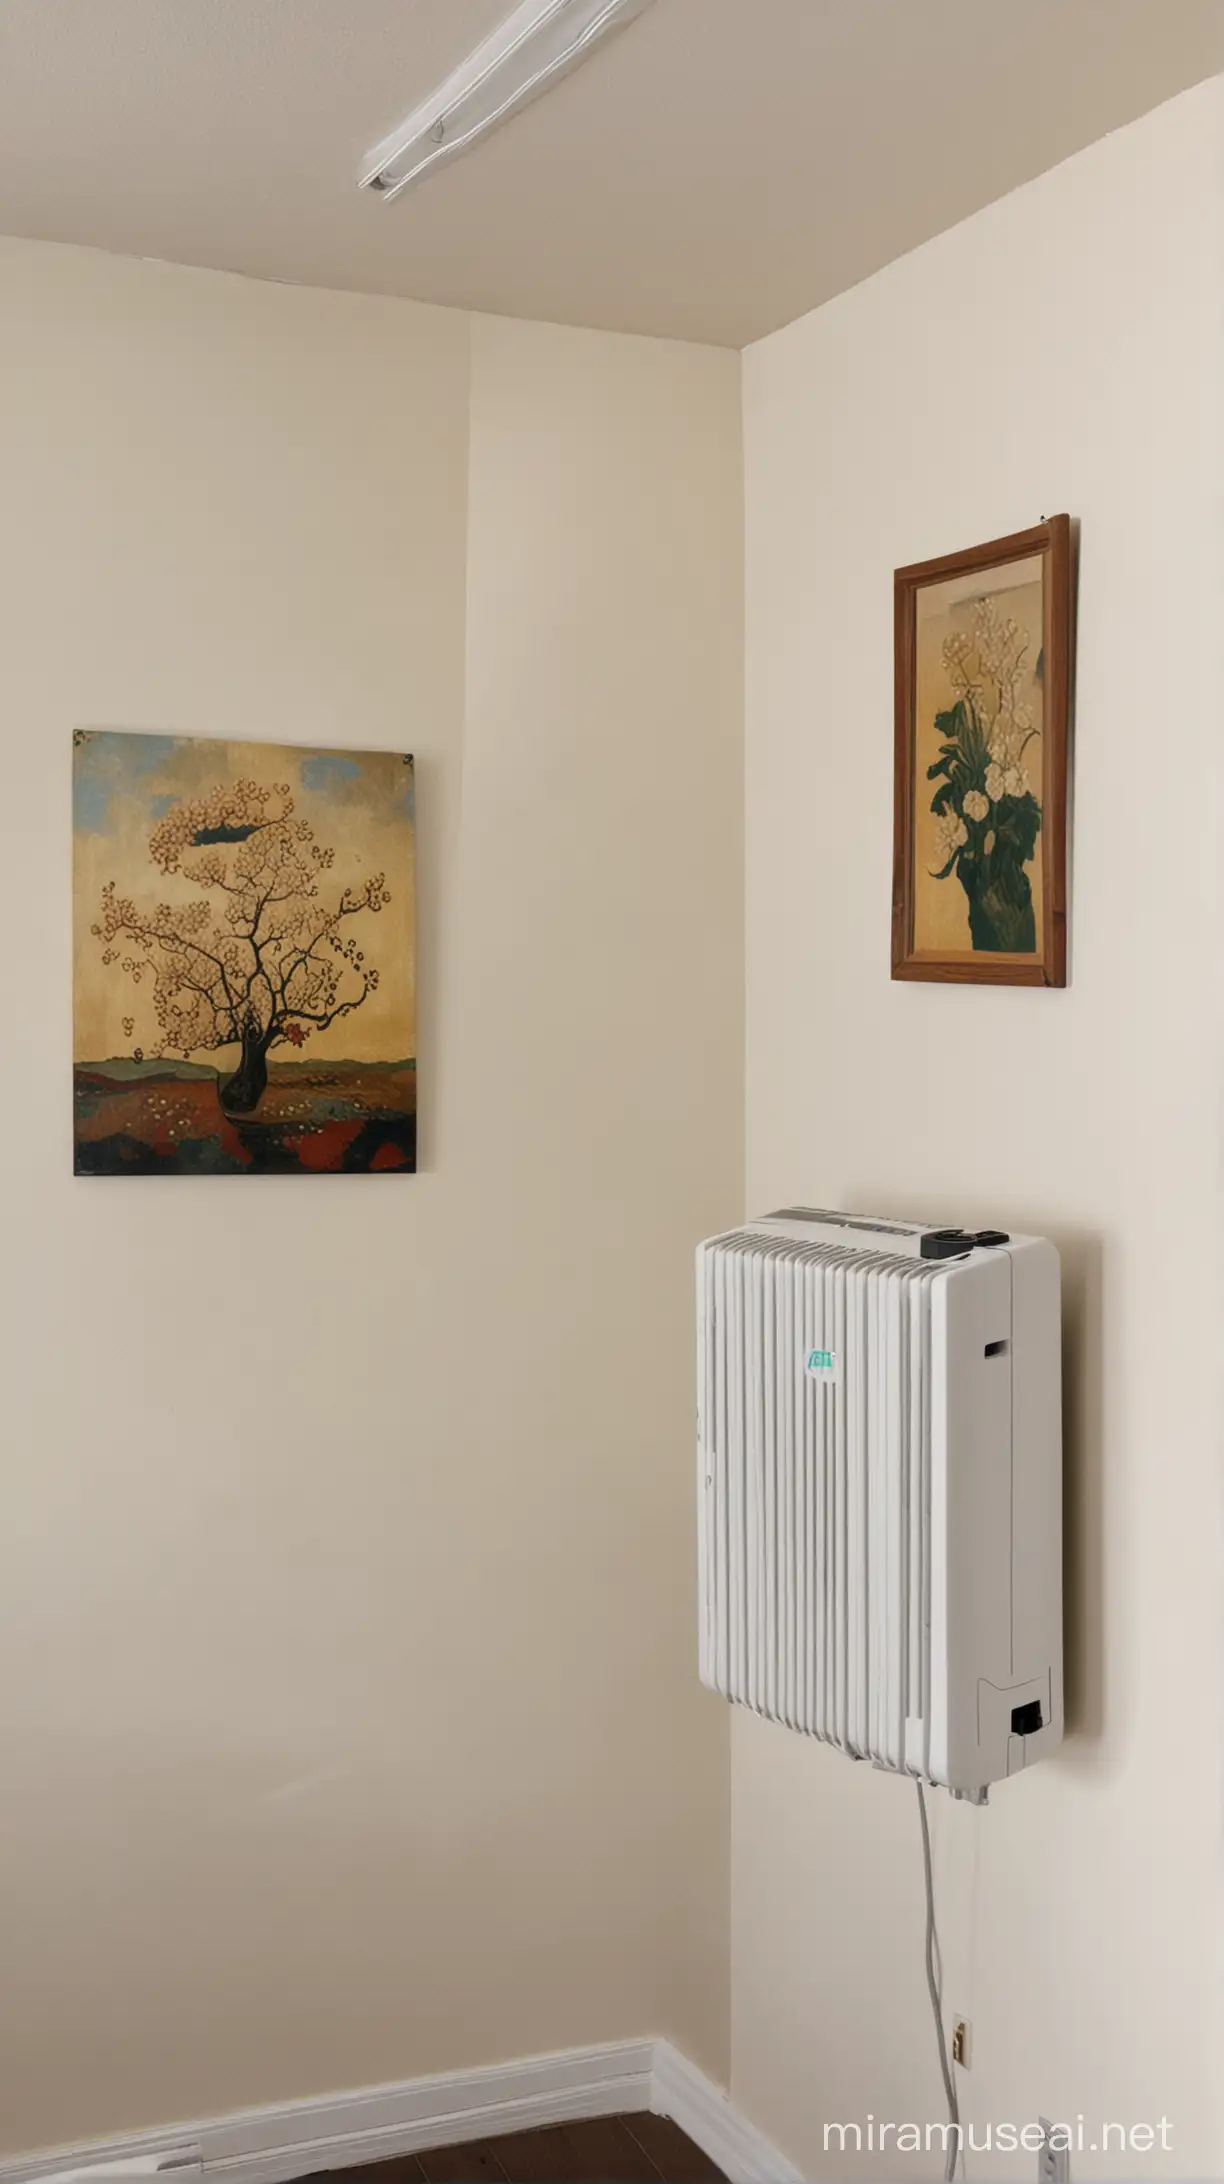 a dehumidifier hanging in a room with art on display
